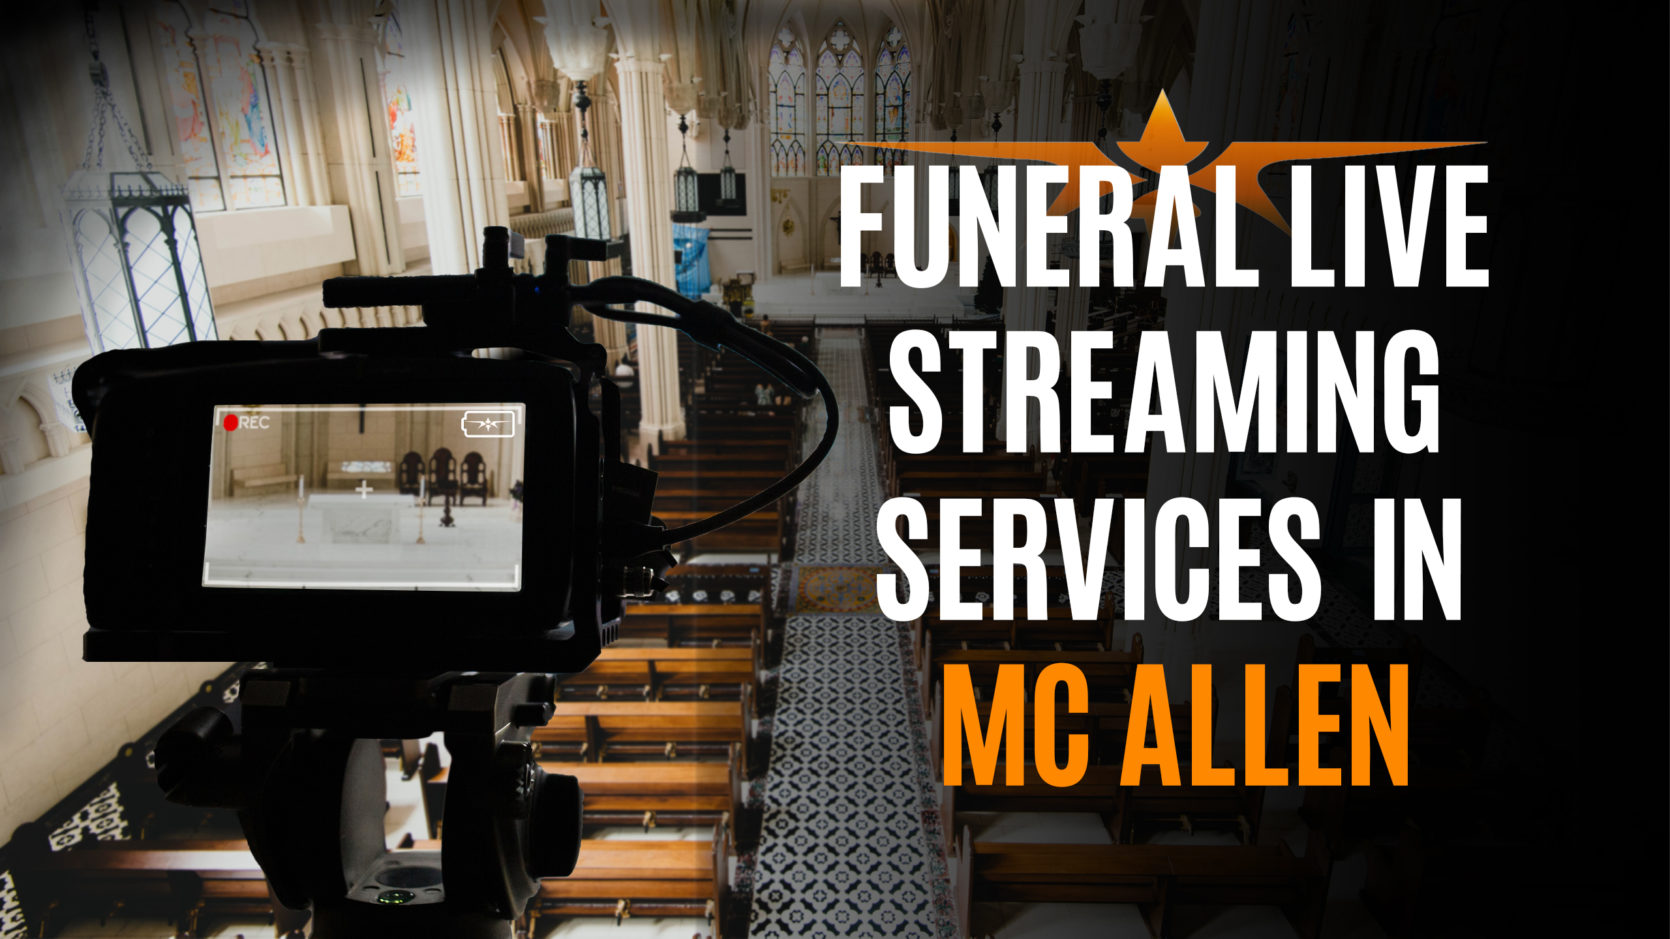 Funeral Live Streaming Services in Mc Allen